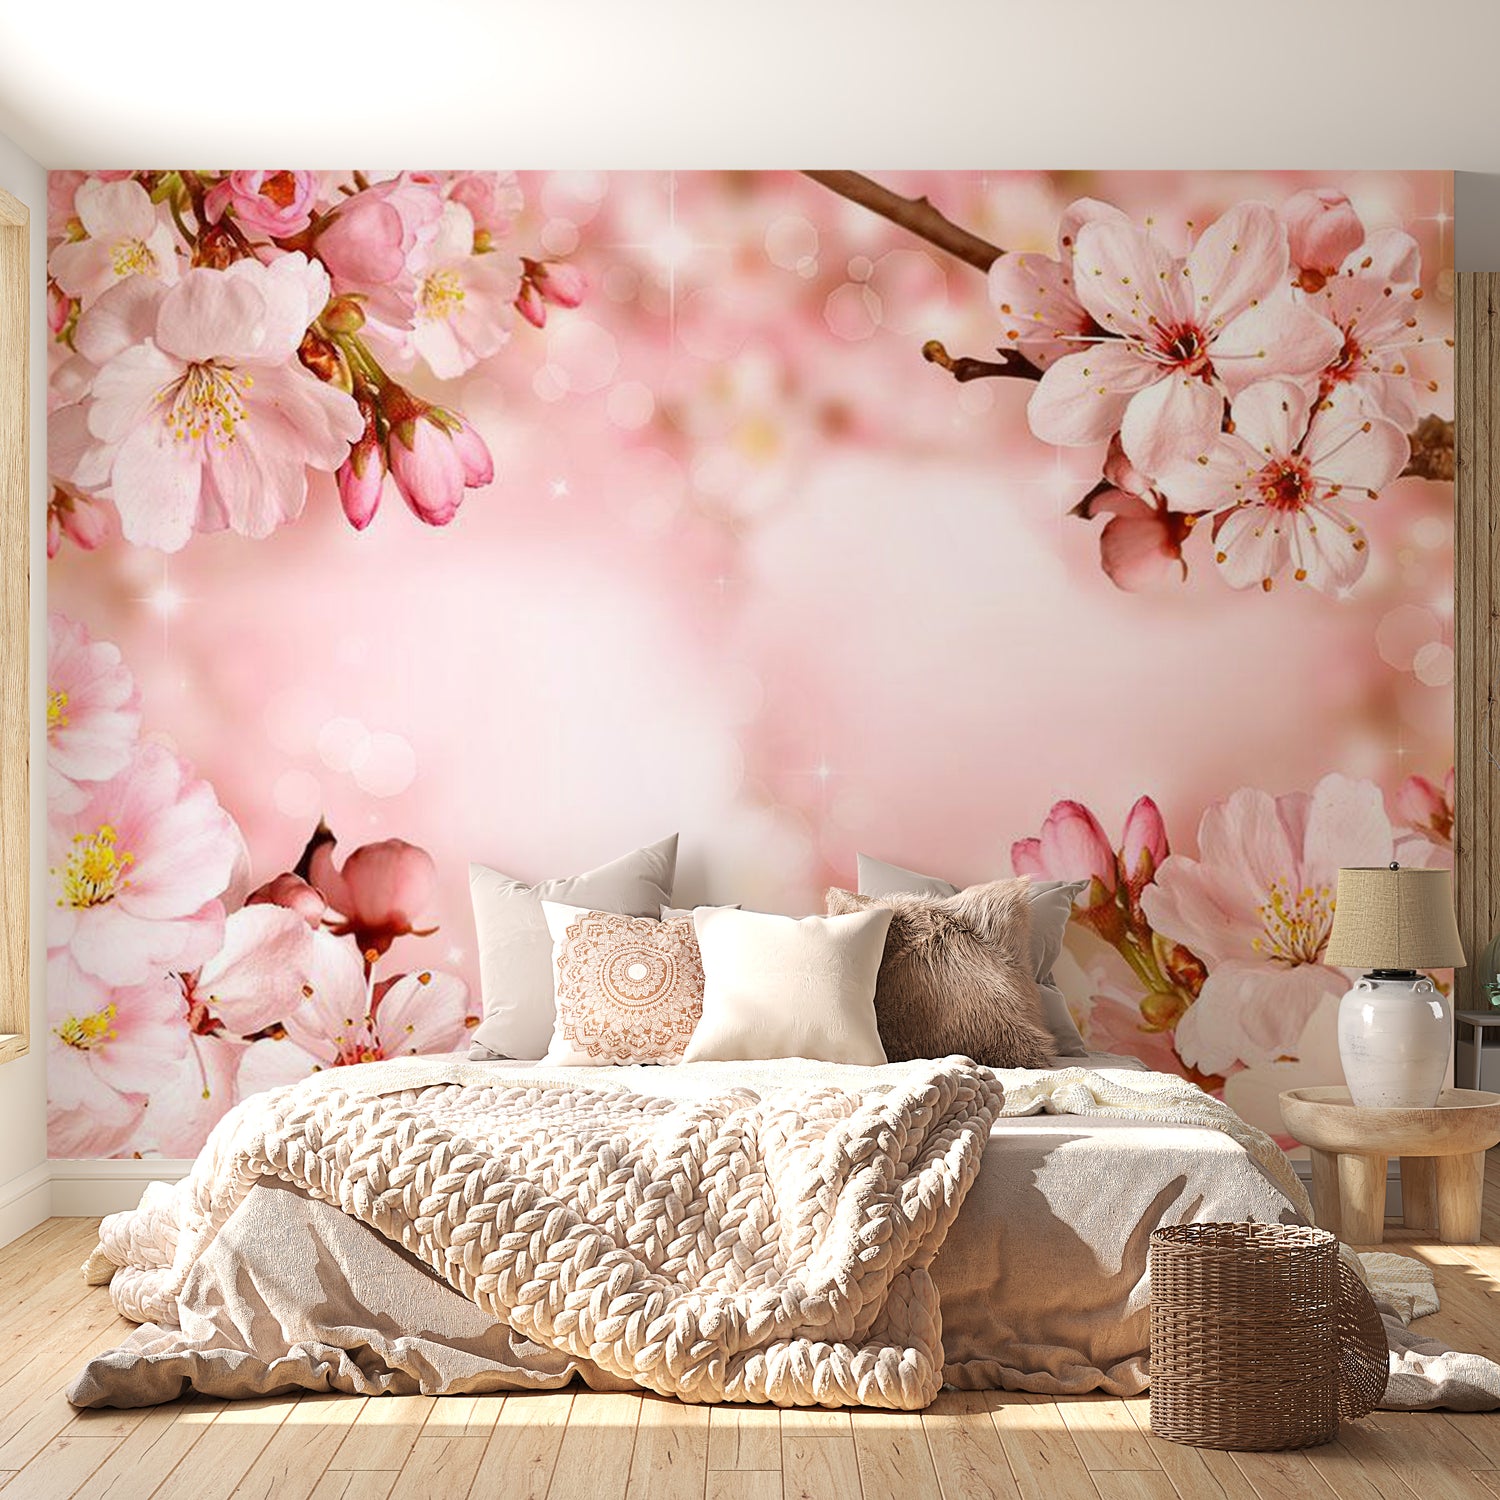 Peel & Stick Floral Wall Mural - Magical Cherry Blossom - Removable Wall Decals